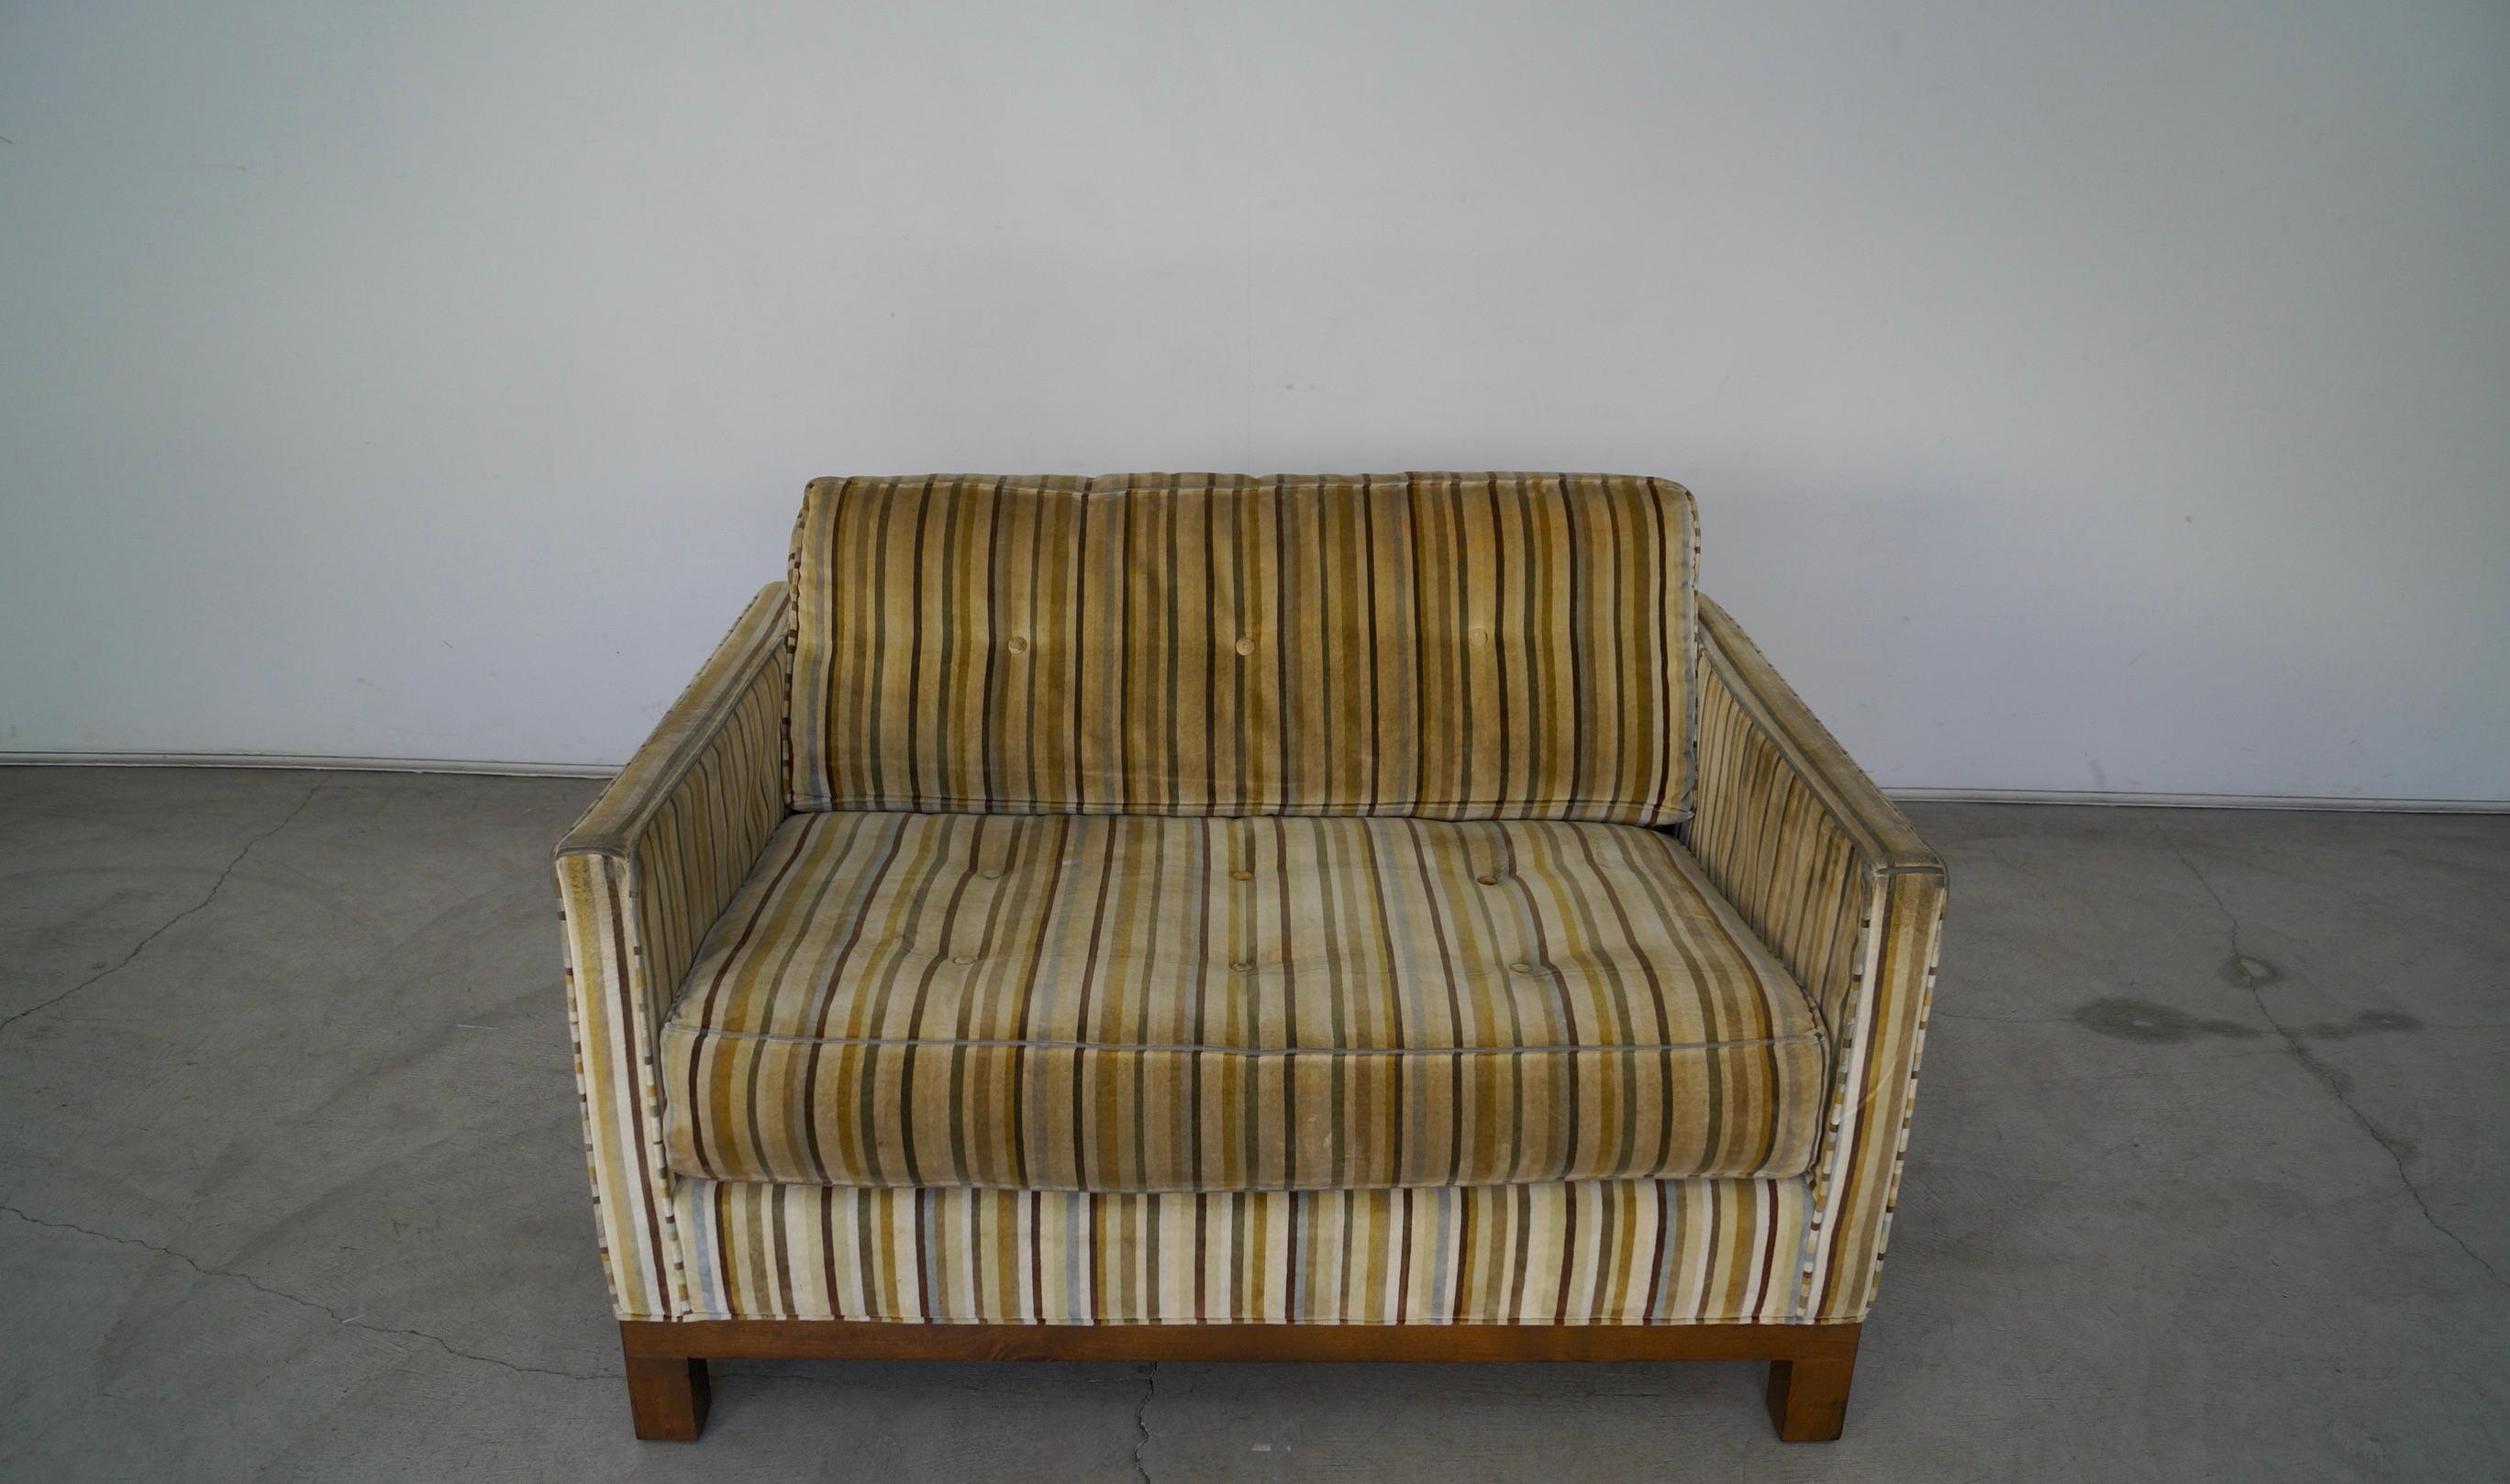 Vintage 1970s Mid-Century Modern compact couch for sale. Incredible small settee Size that is a two-seater. Very rare to have a sofa this Size. Very high-quality vintage sofa with a solid wood base frame in a walnut finish. It has the original